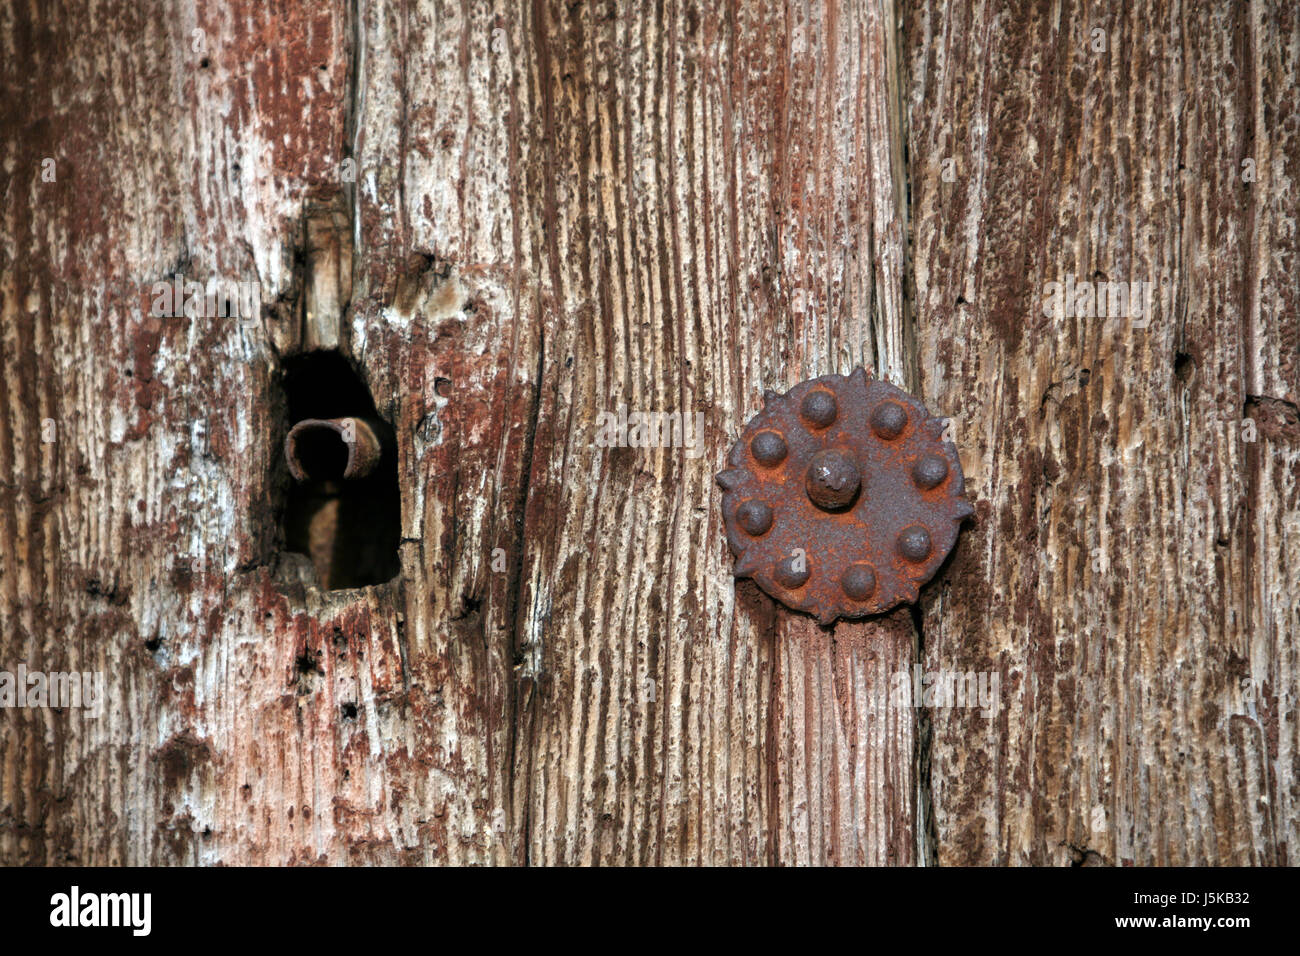 lock wood antique door andalusia keyhole metal fittings cordoba structure old Stock Photo